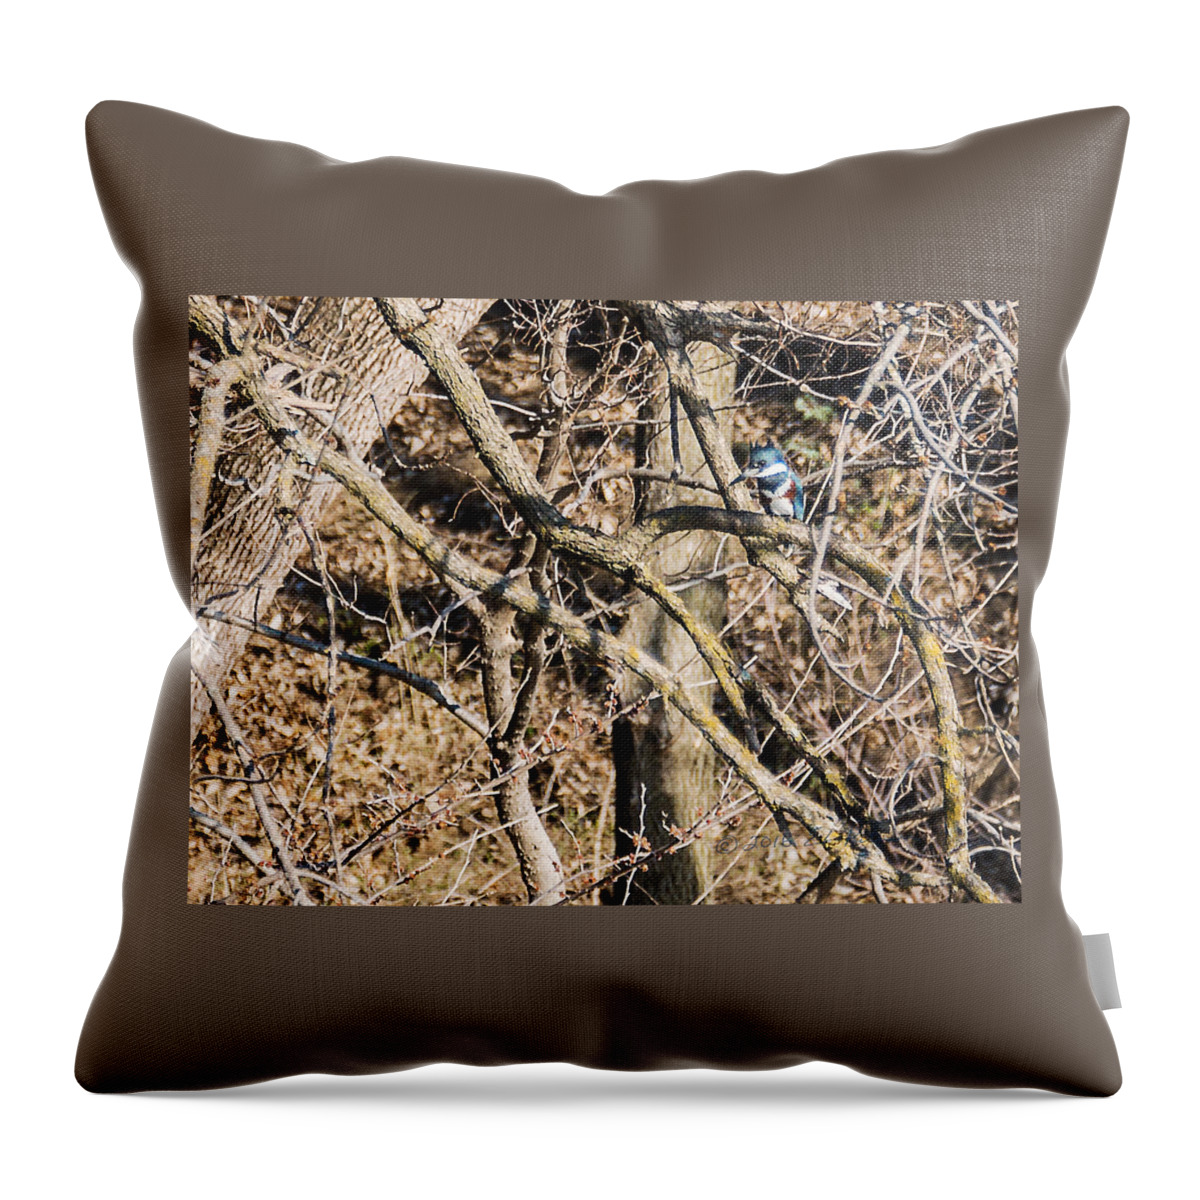 Kingfisher Throw Pillow featuring the photograph Kingfisher Hunting by Ed Peterson